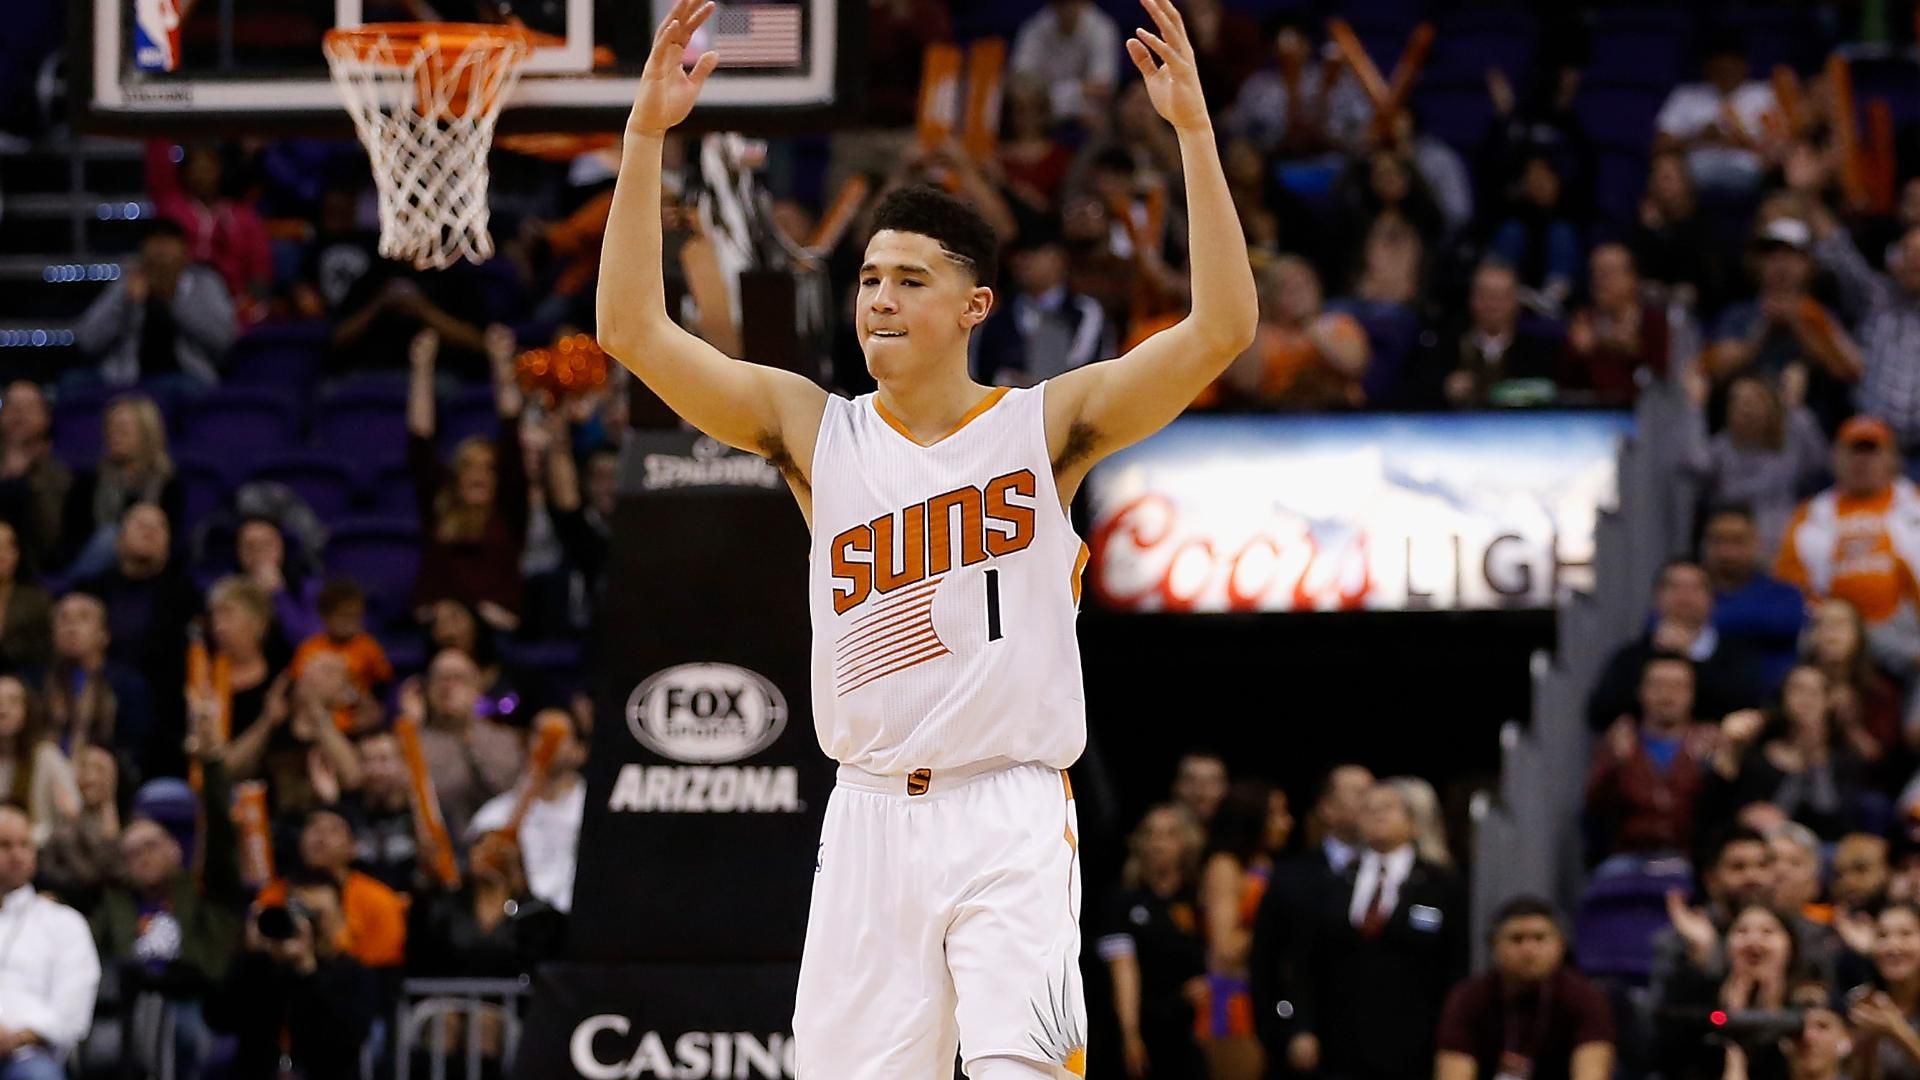 Download free Devin Booker Wallpaper 1920x1080 59369 available in different...